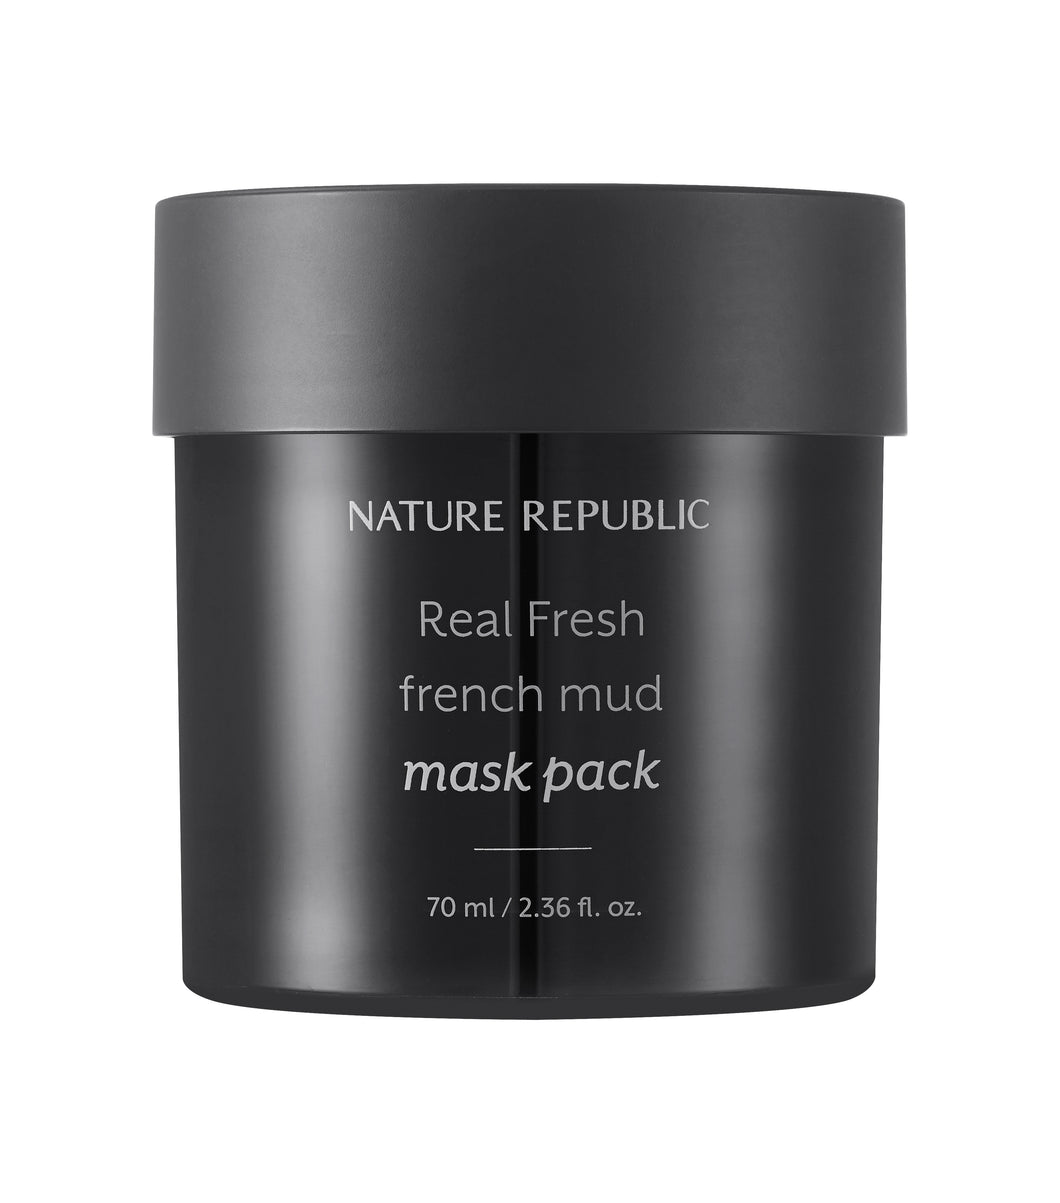 Real Fresh French Mud Mask Pack